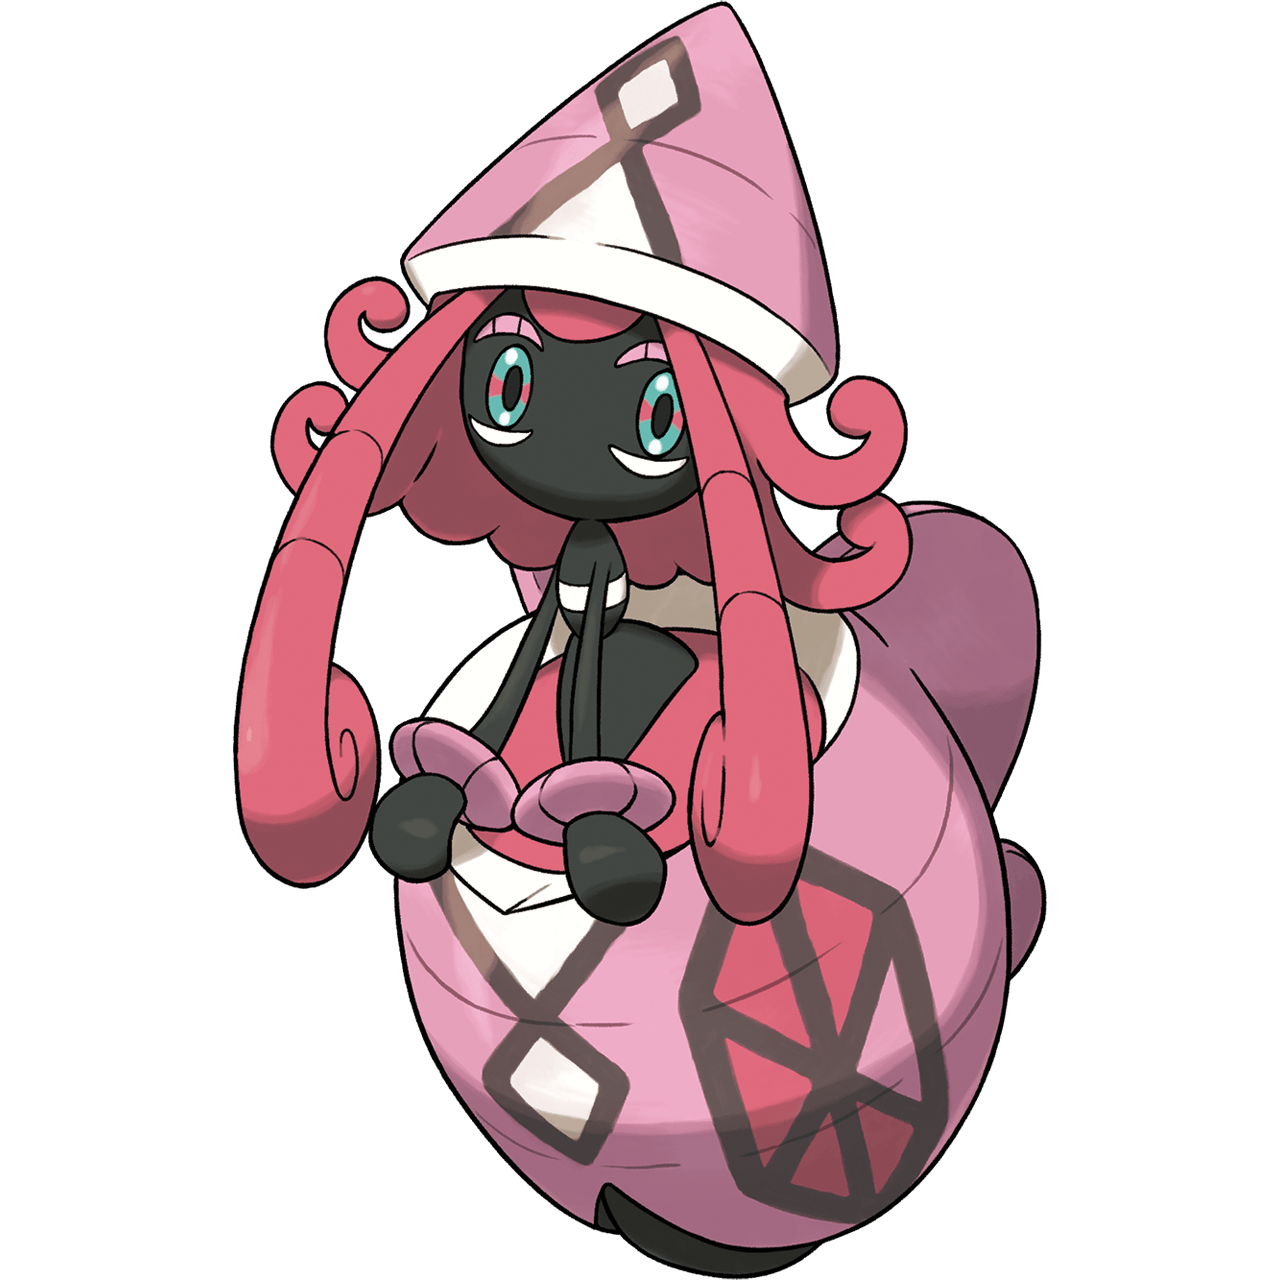 Tapu Lele screenshots, Wallpaper and pictures